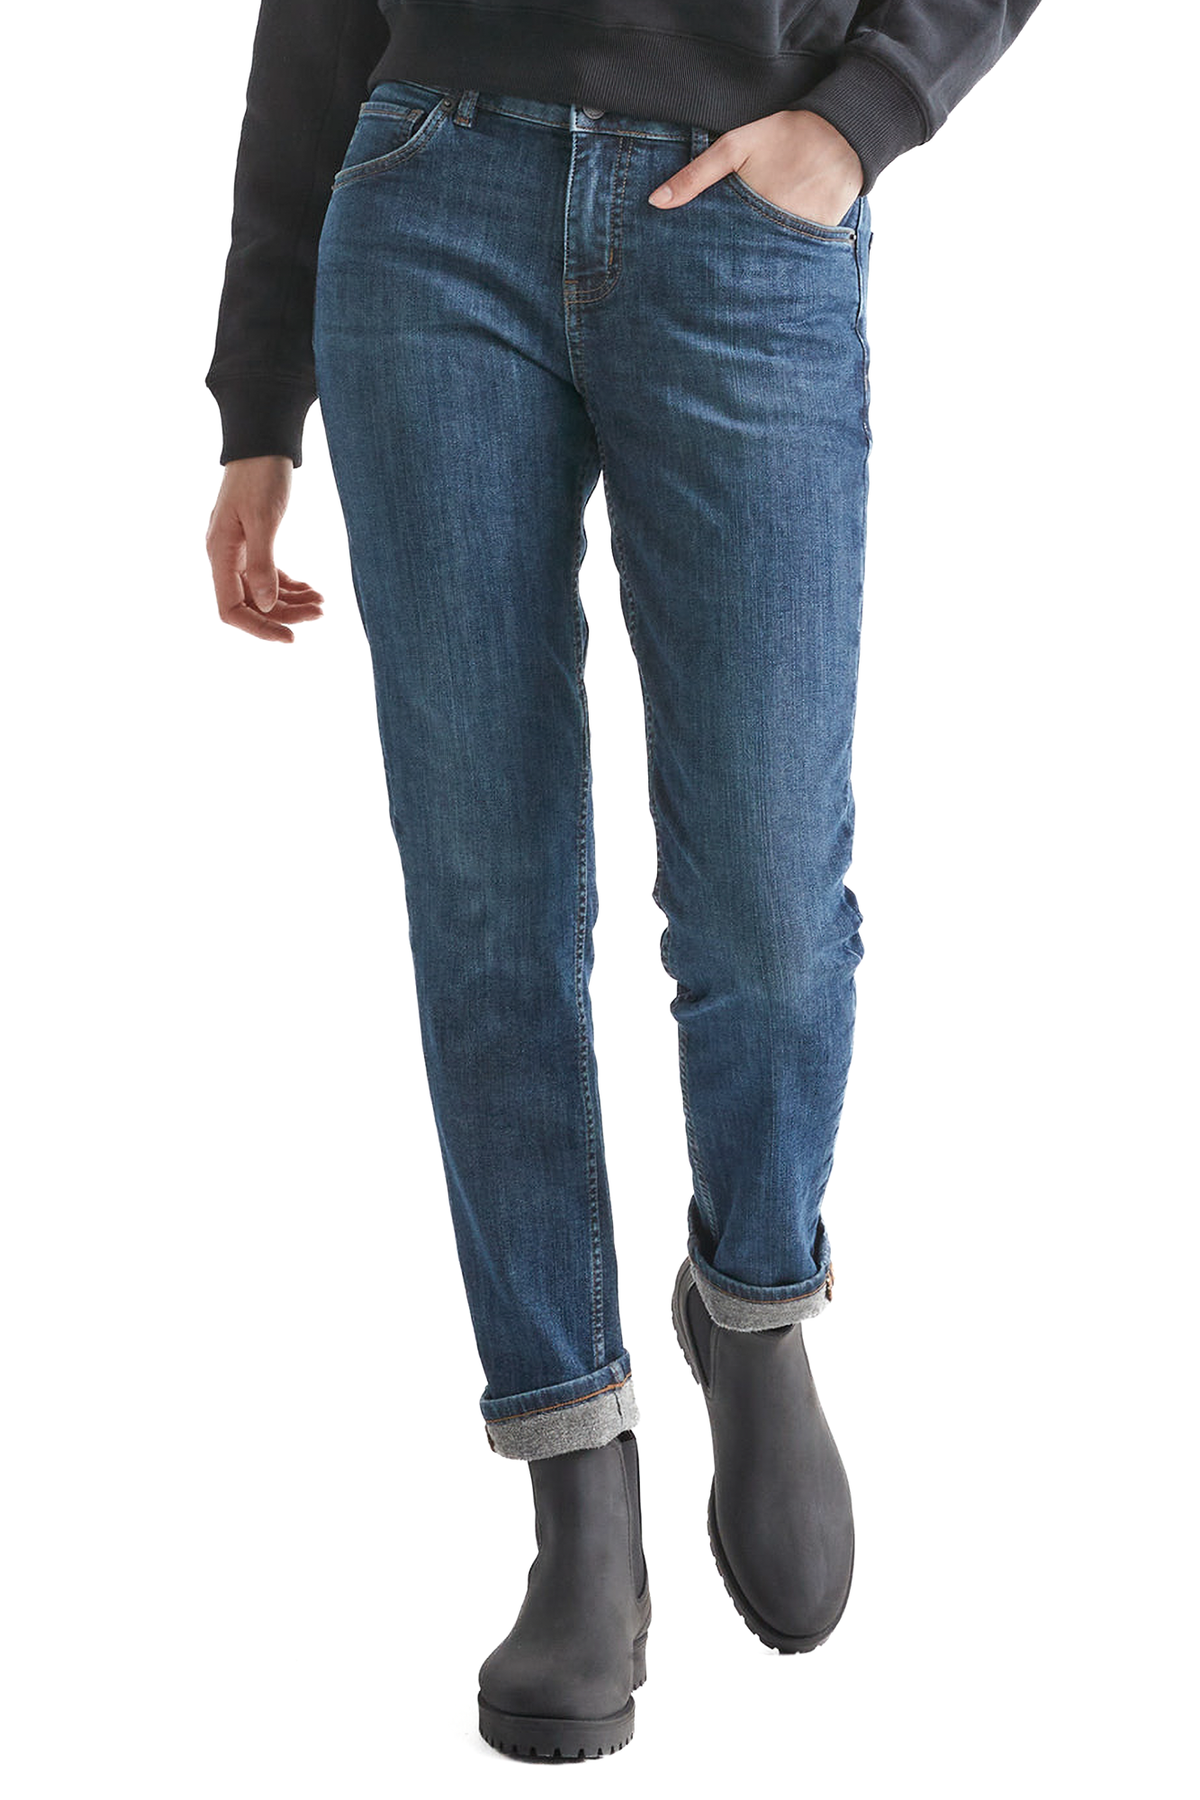 DUER Stay Dry Fireside Slim Straight Leg Jeans In Heritage Rinse